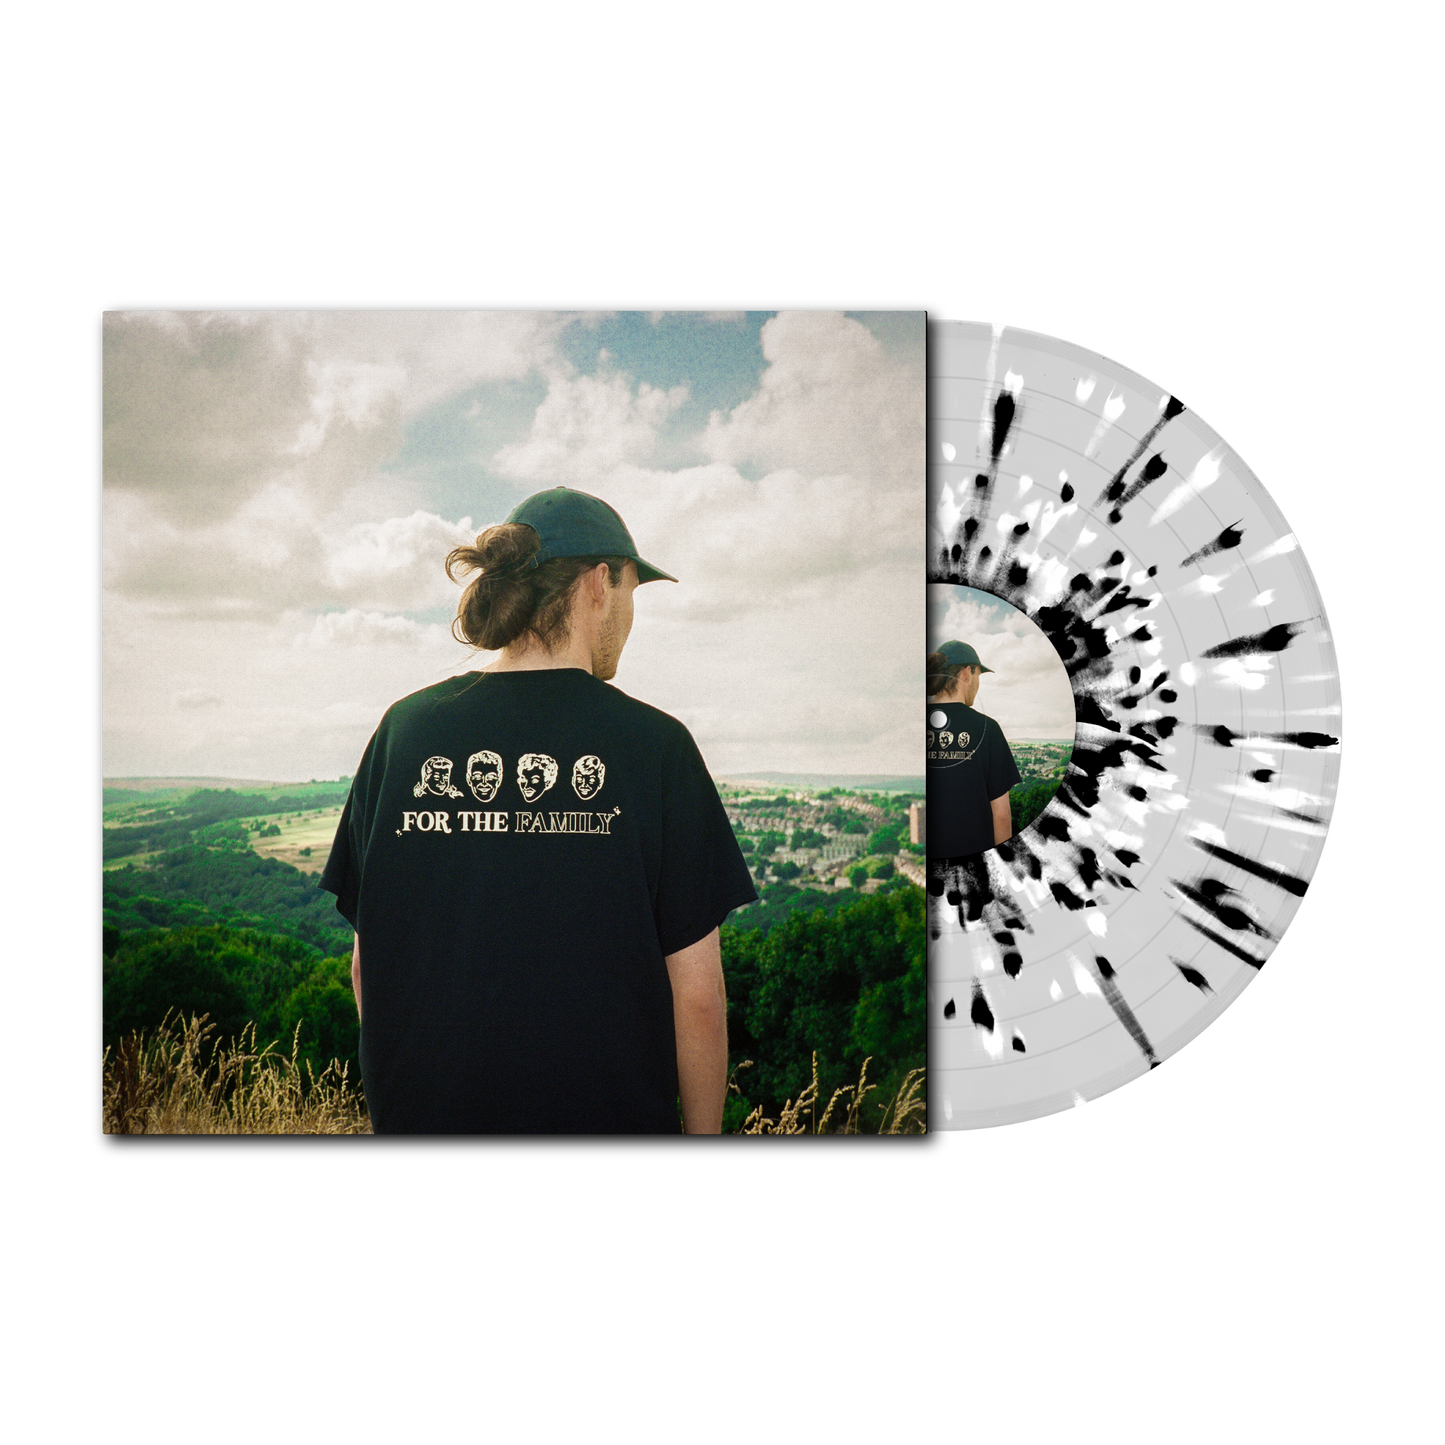 FOR THE FAMILY VINYL - CLEAR W/ BLACK AND WHITE SPLAT